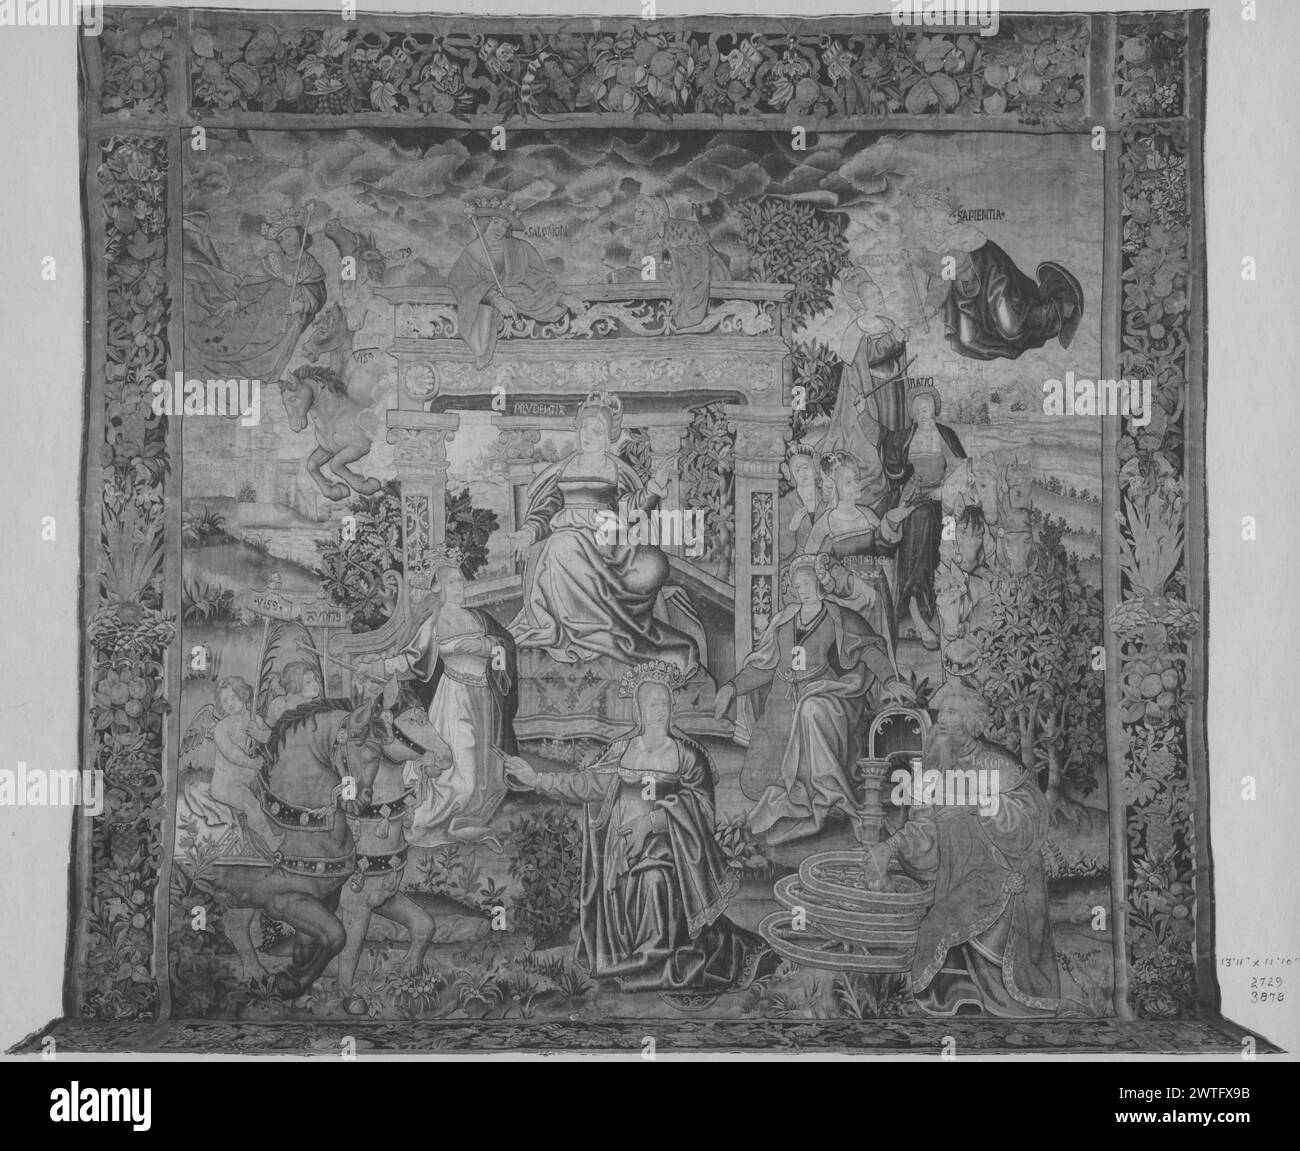 Allegory of Prudence and the Five Senses. unknown c. 1530-1550 Tapestry Dimensions: H 11'10' x W 13'11' Tapestry Materials/Techniques: unknown Culture: Flemish Weaving Center: unknown Ownership History: French & Co. purchased from American Art Association (609) 11/1916; sold to Mrs. J. S. Cosden. Female personification of Prudence seated in architectural pavilion & surrounded by personifications in landscape; above are horses personifying the senses Vision, Smell, Touch & Taste on L next to male crowned figure; Solomon & another male figure are on top of pavilion; female personification of Wis Stock Photo